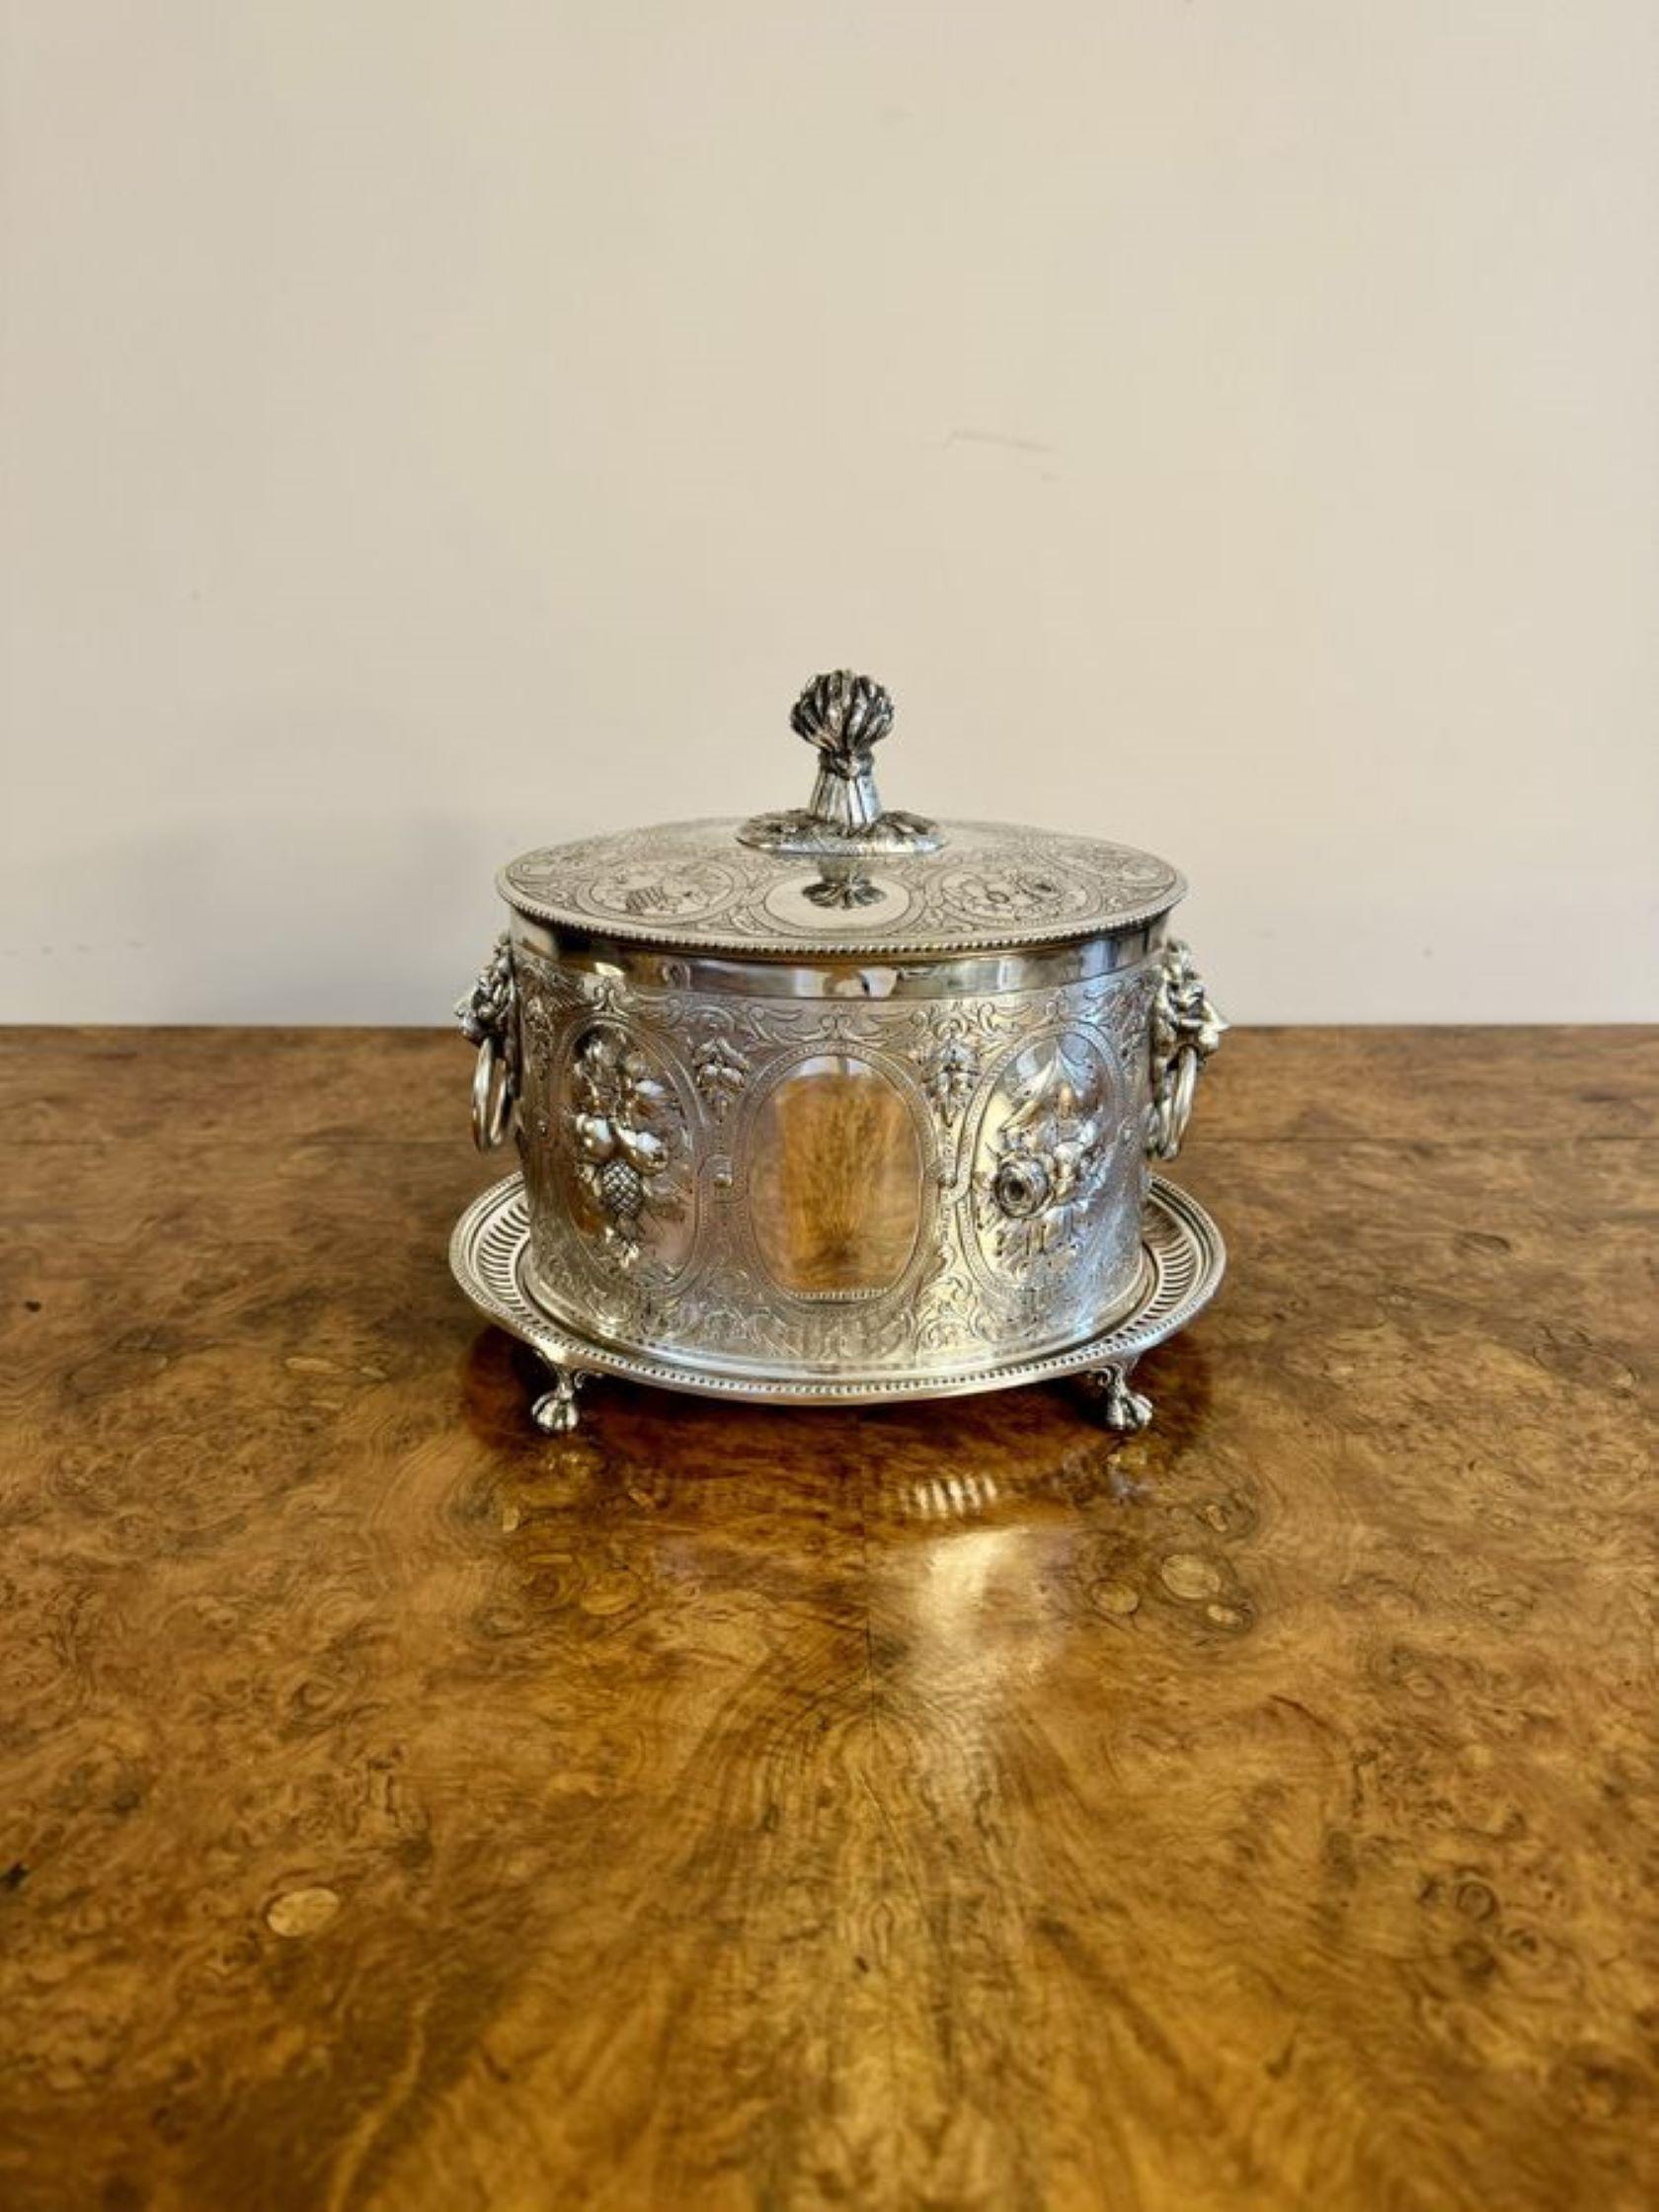 Outstanding quality antique Edwardian ornate silver plated biscuit barrel  For Sale 3